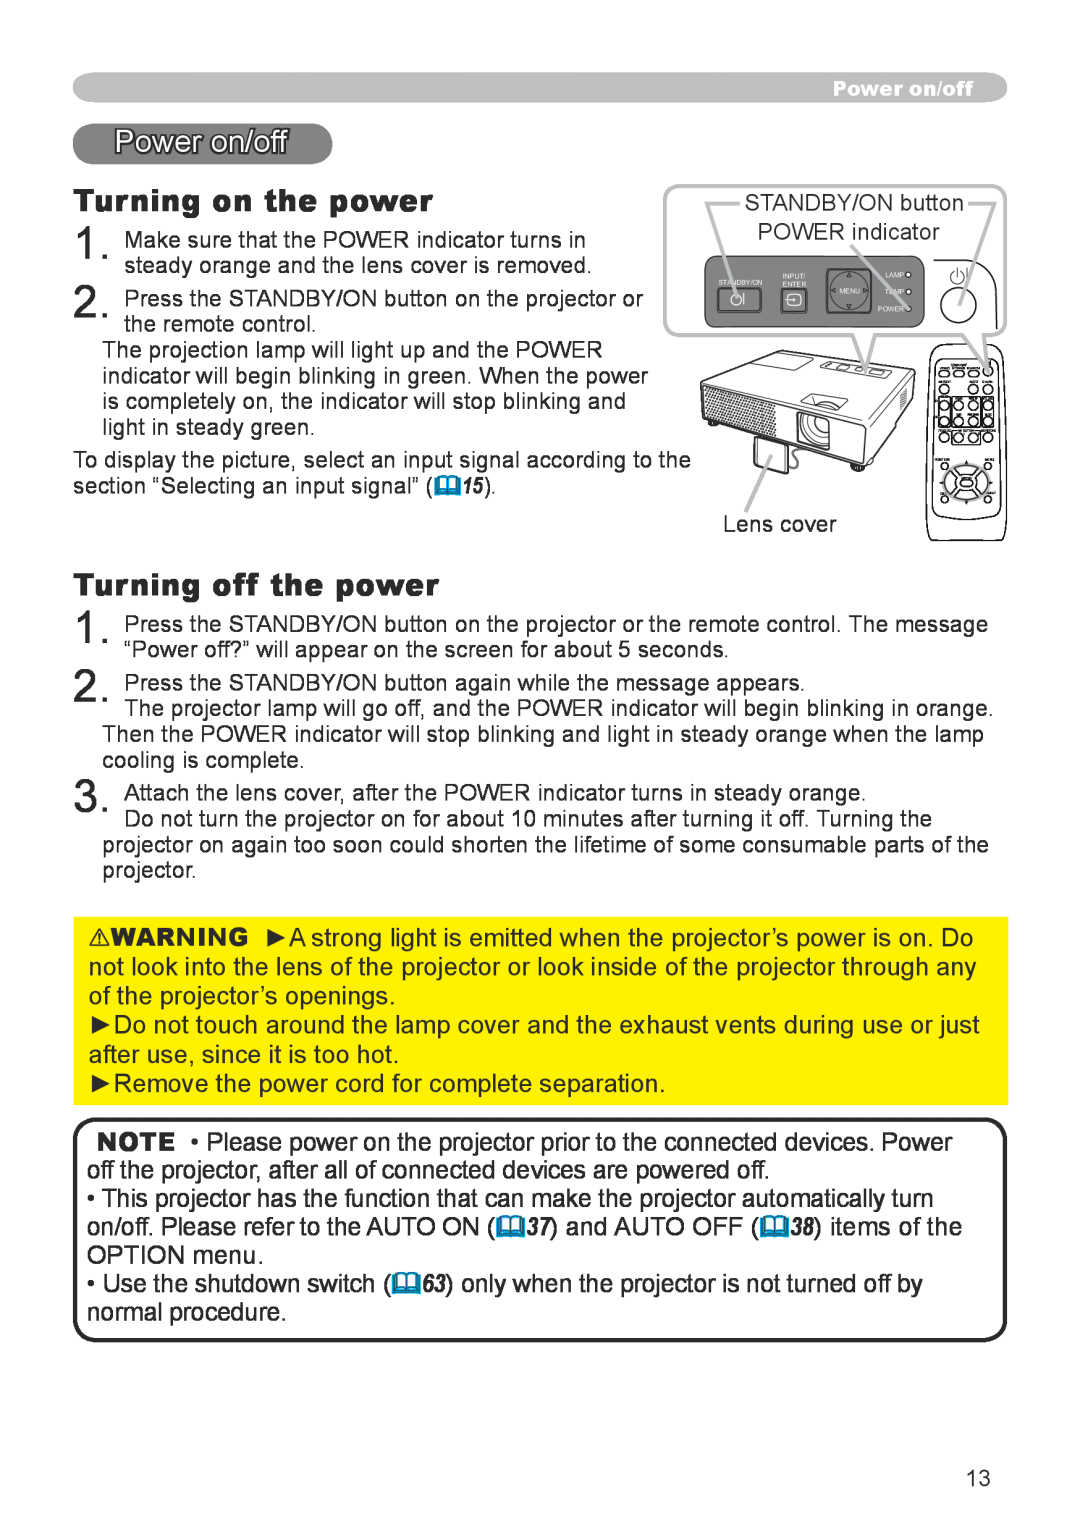 Apple CPX1, CPX5 user manual Power on/off, Turning on the power, Turning off the power 